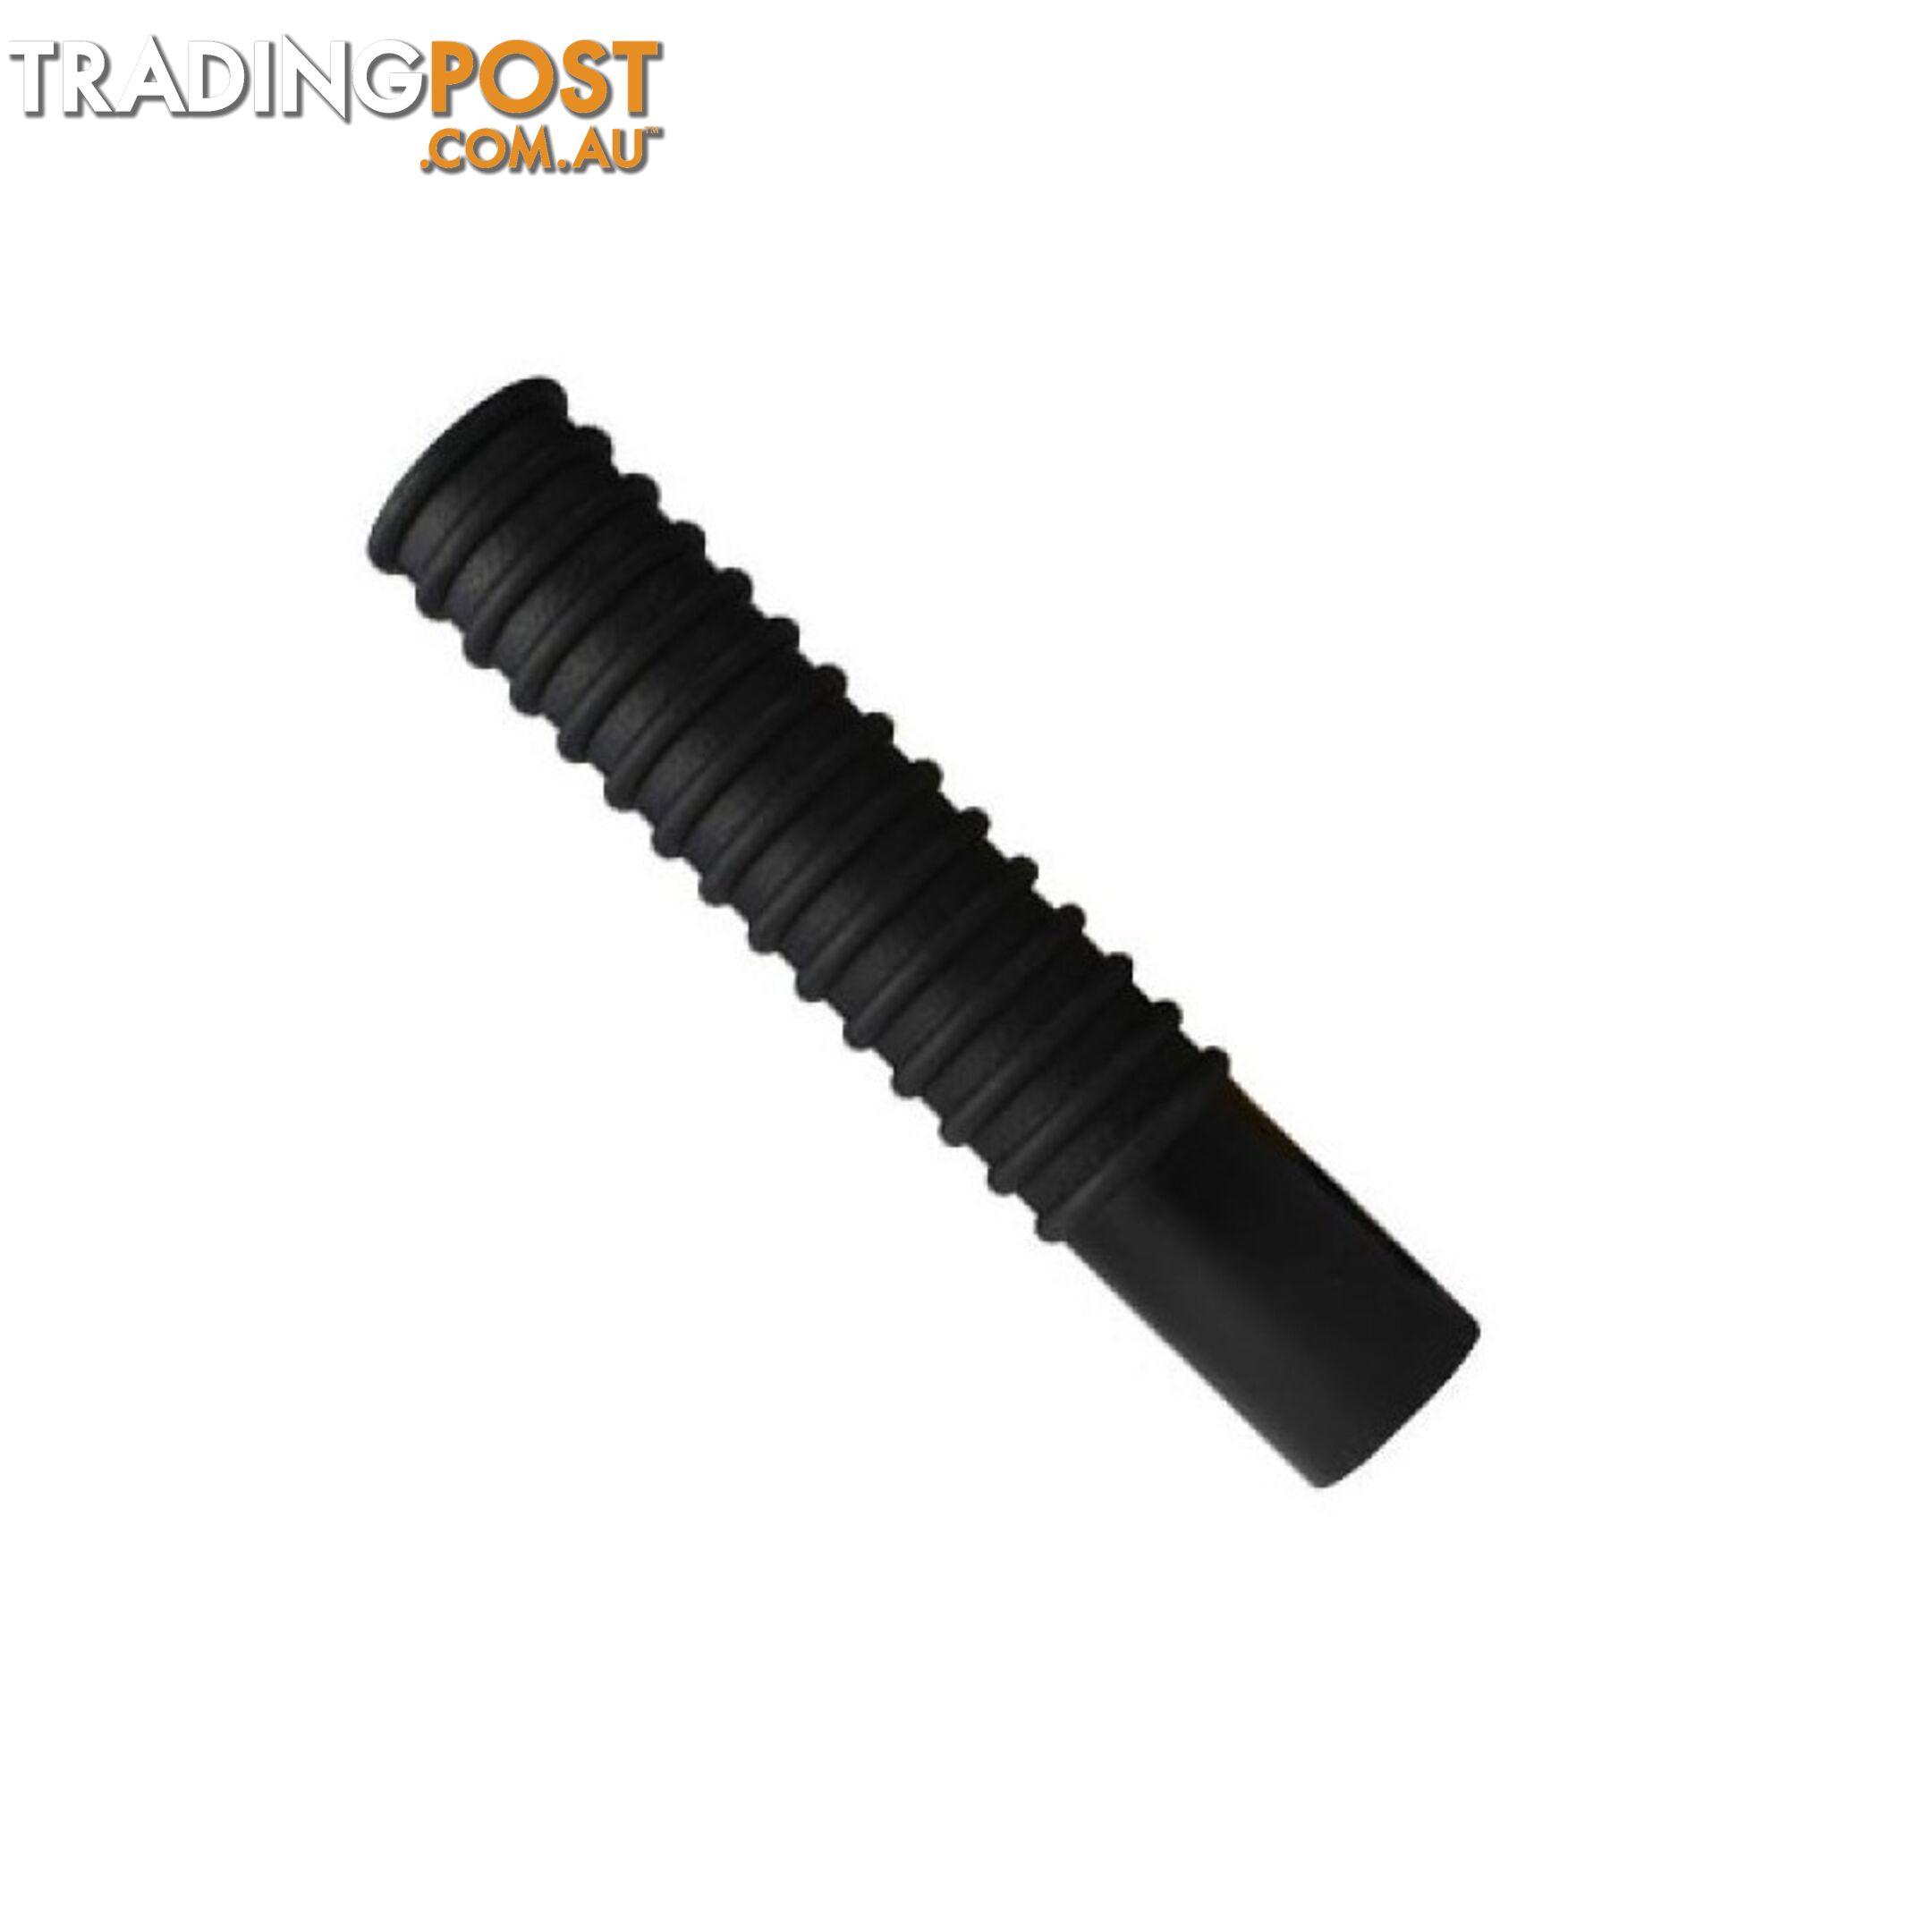 Large Threaded Ribbed Handle